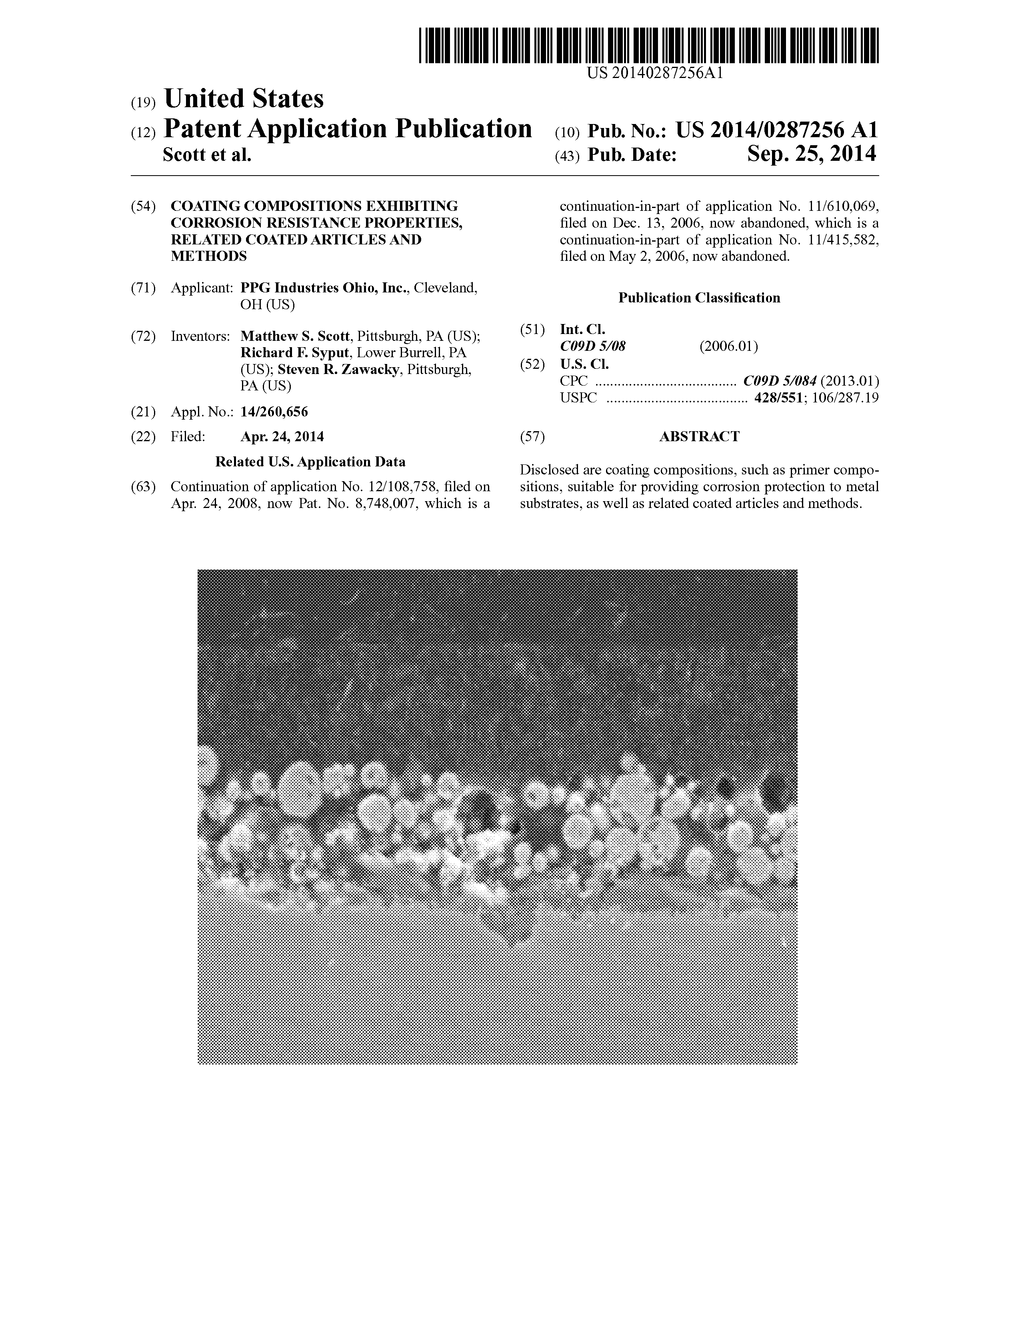 COATING COMPOSITIONS EXHIBITING CORROSION RESISTANCE PROPERTIES, RELATED     COATED ARTICLES AND METHODS - diagram, schematic, and image 01